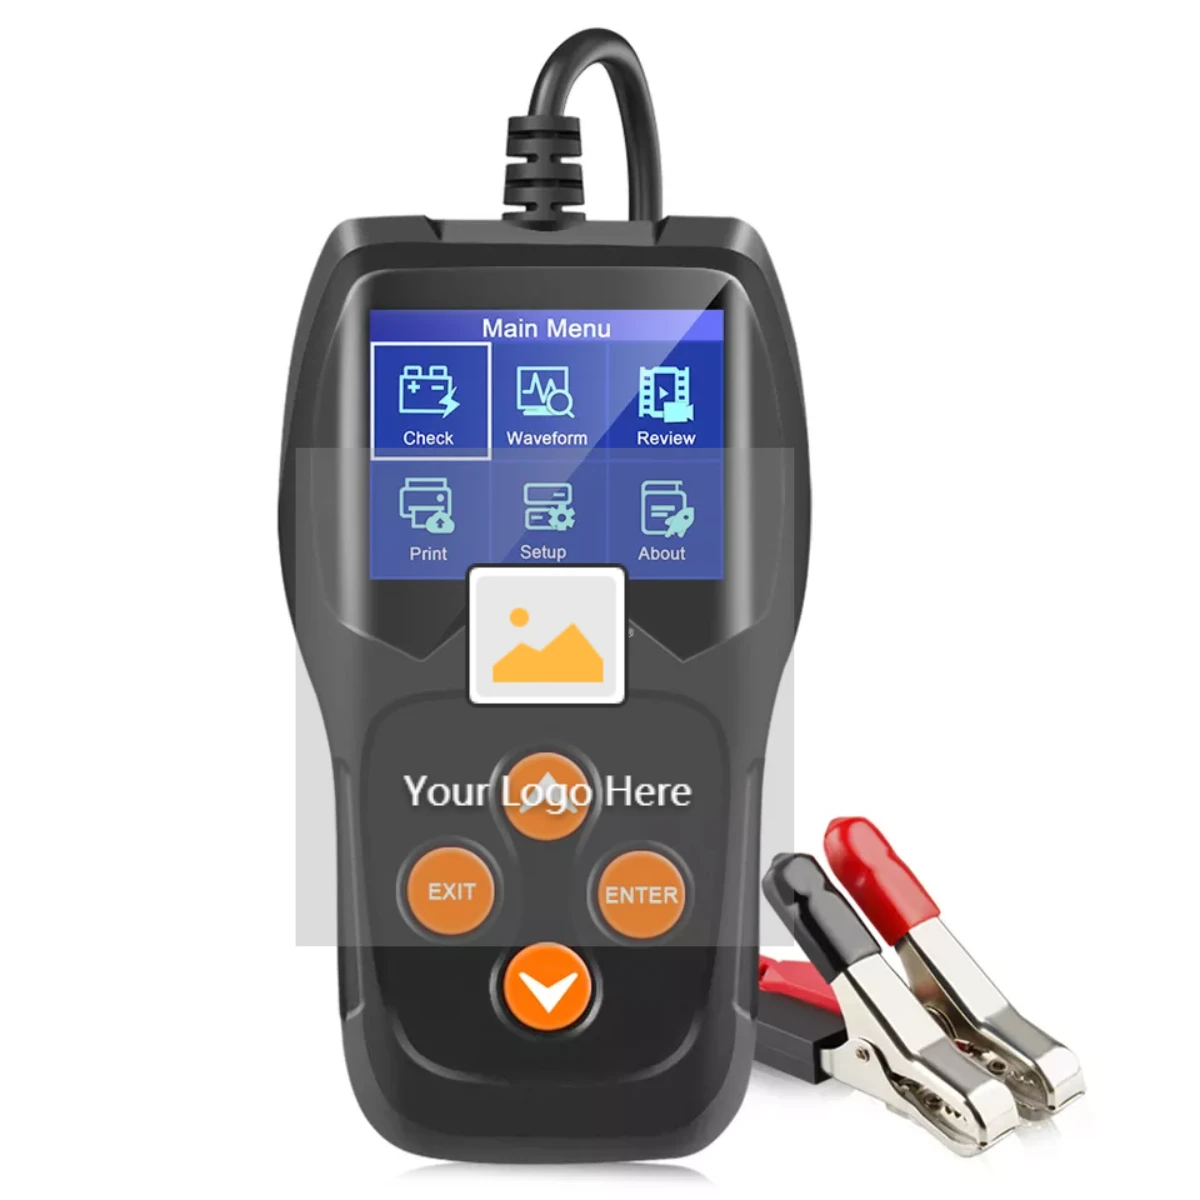 accept OEM  Hot sell KONNWEI KW600 car battery diagnostic scanner with Cranking Charging  voltage resistance test